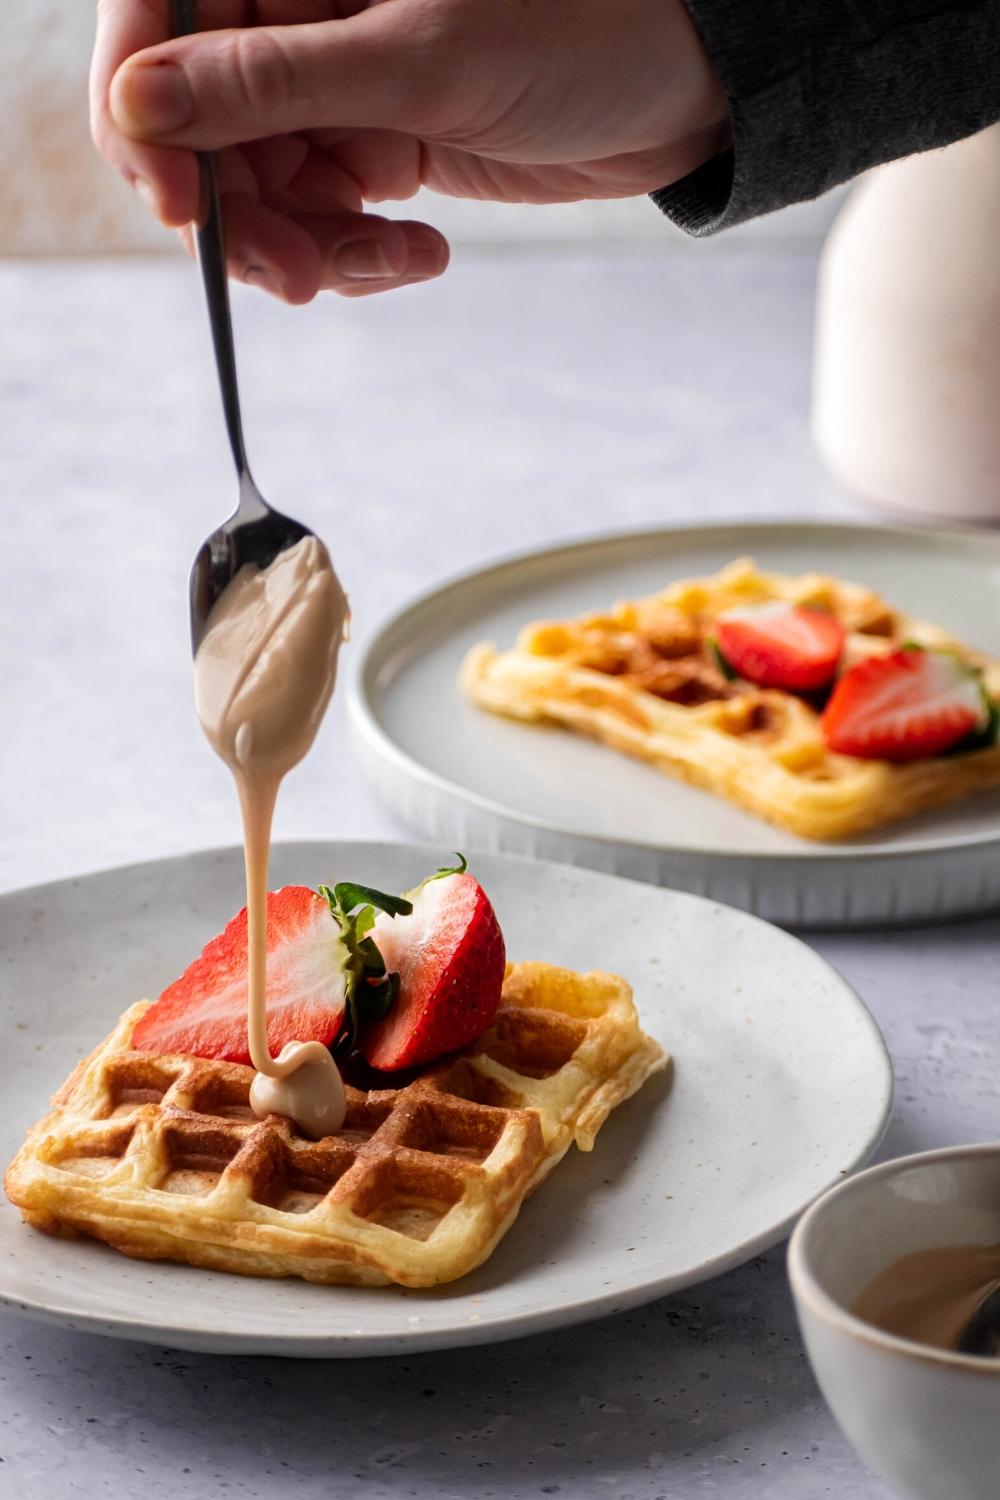 A hand holding a spoon with dulce de leche on it drizzling it over the top of a waffle that is on a white plate. Behind it is part of another white plate with a waffle on it.